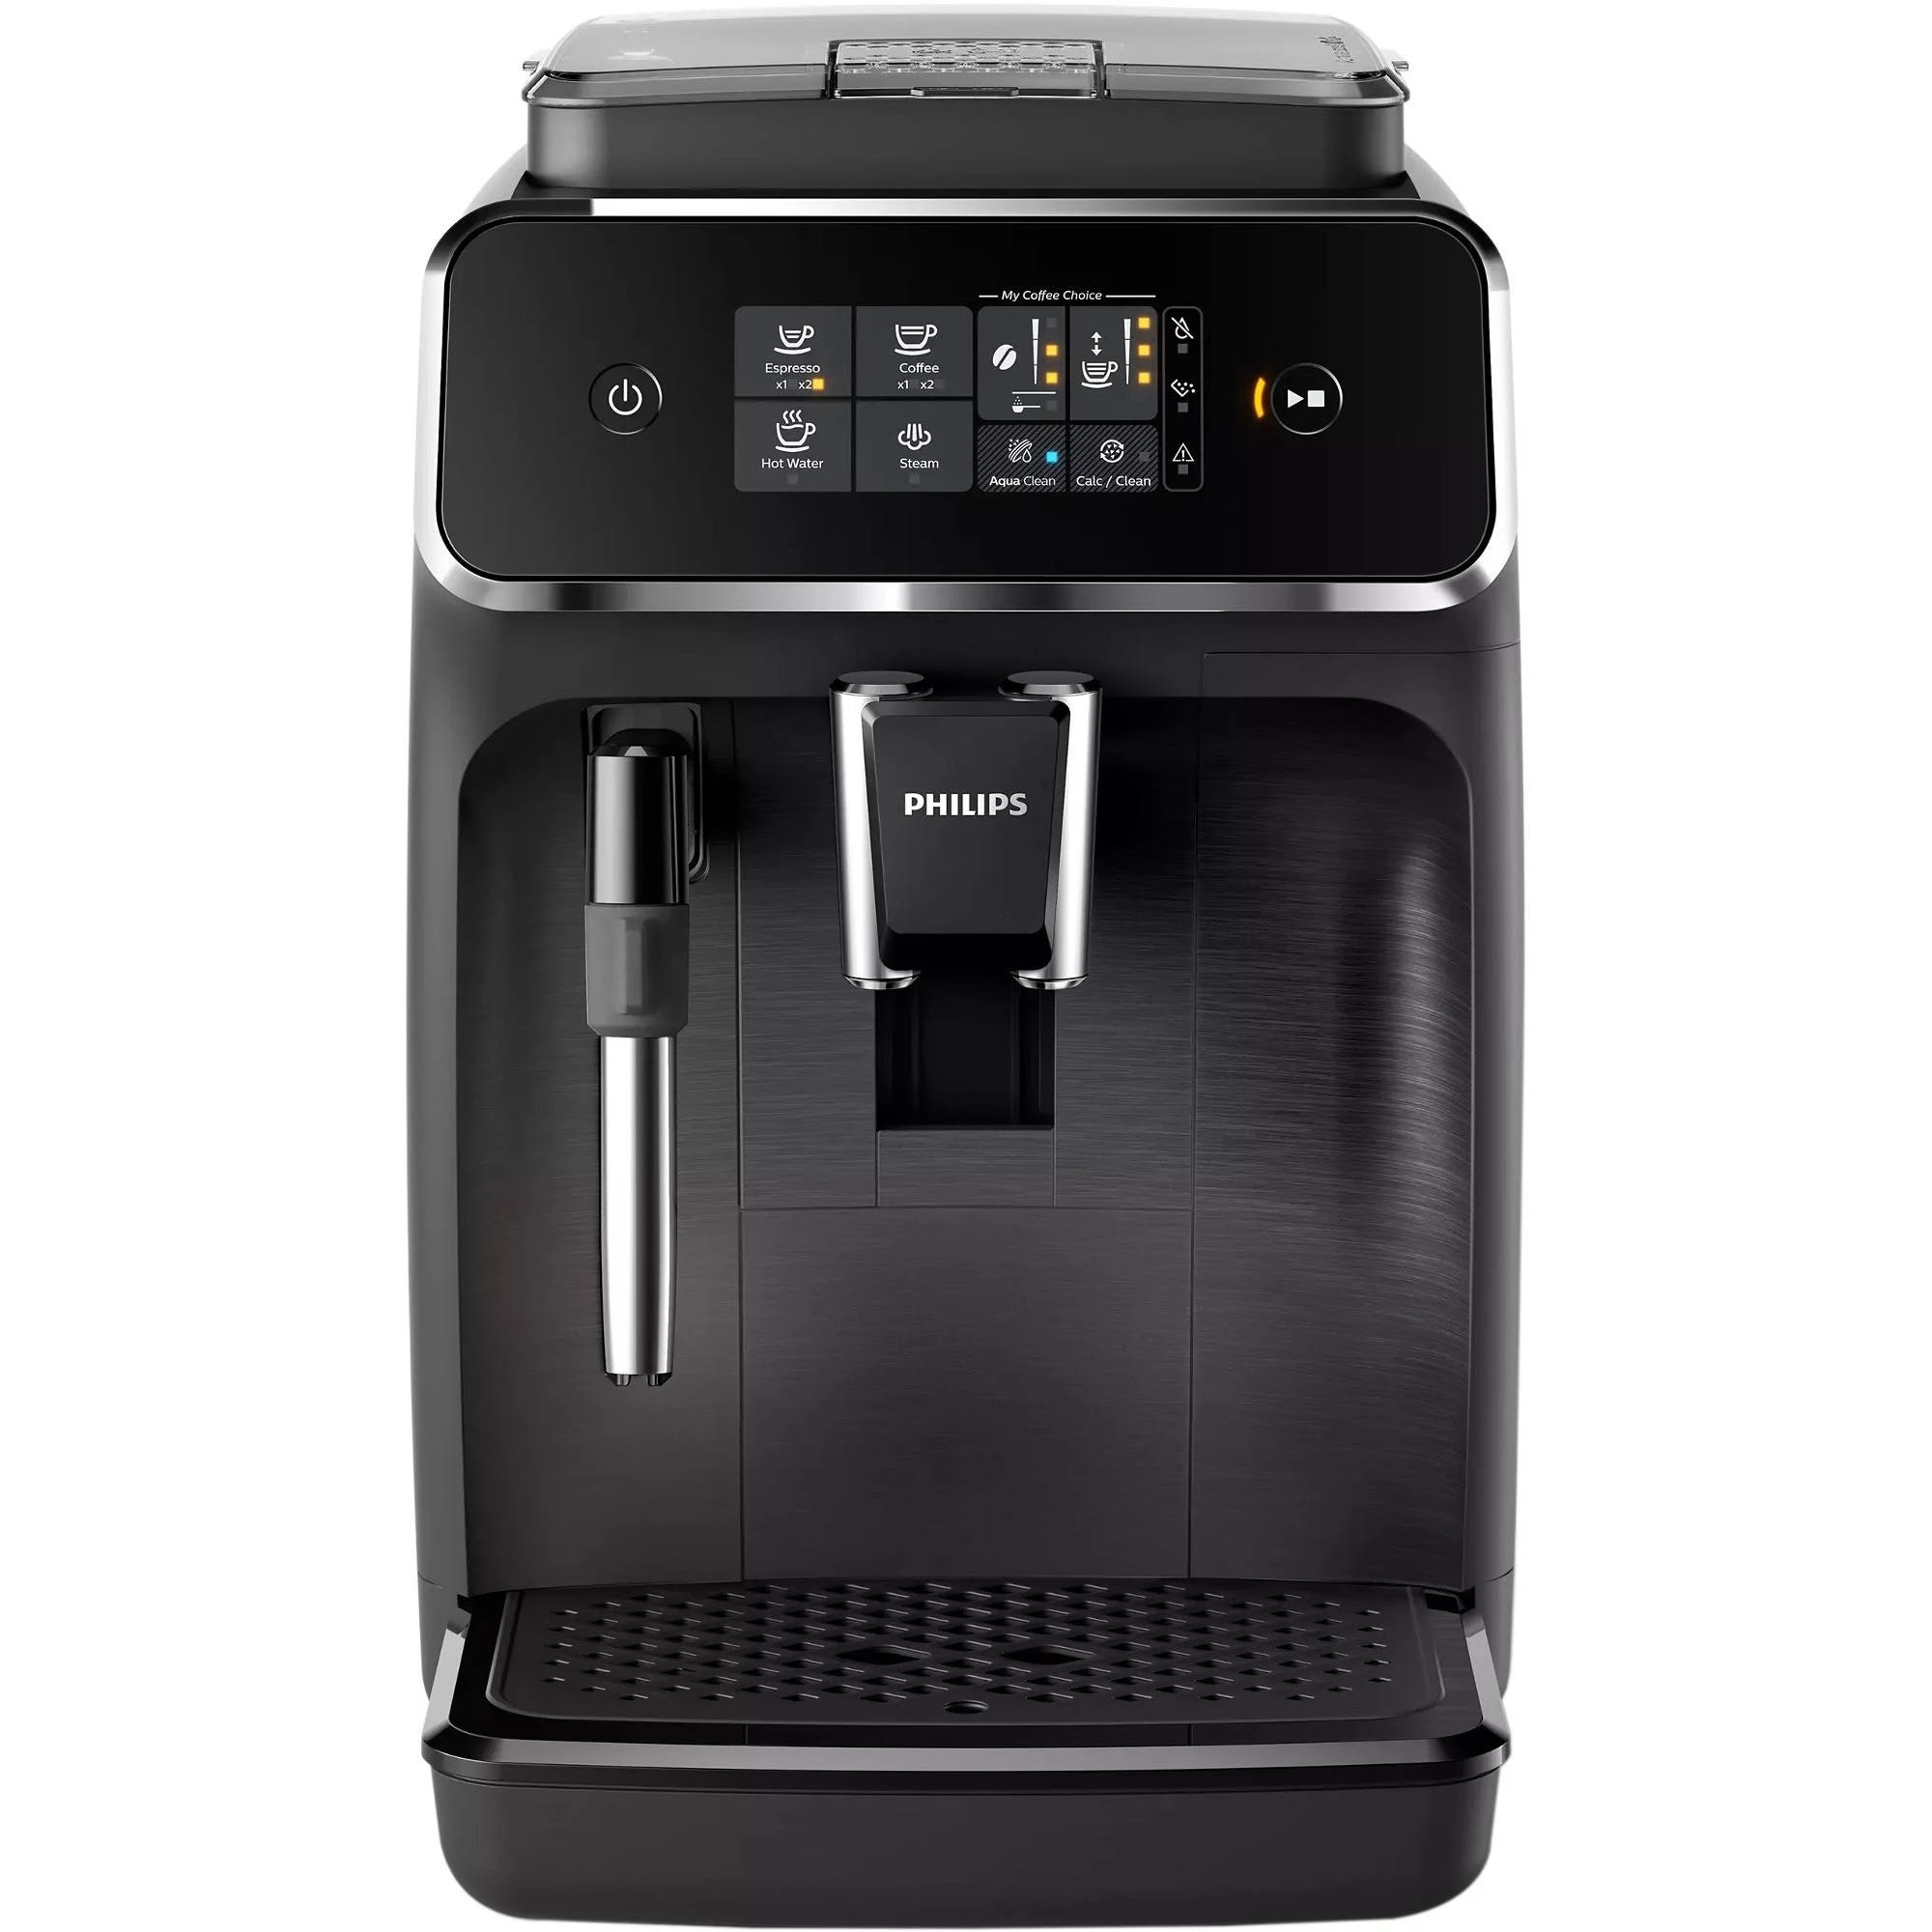 Philips 2200 Series Fully Automatic Espresso Machine with Milk Frother | Image